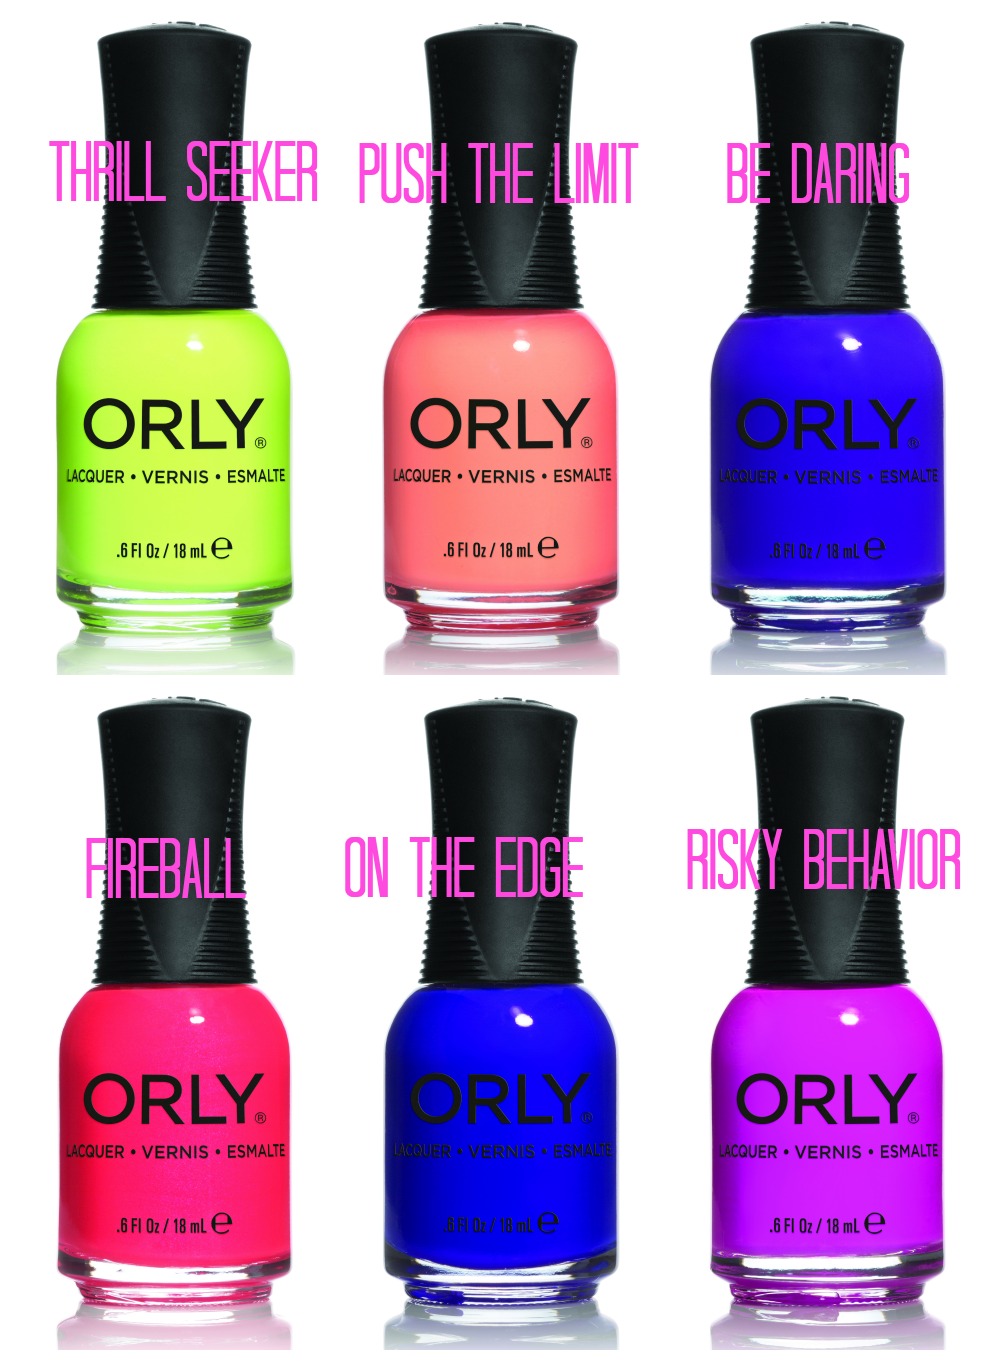 orly_adrenaline_preview_02